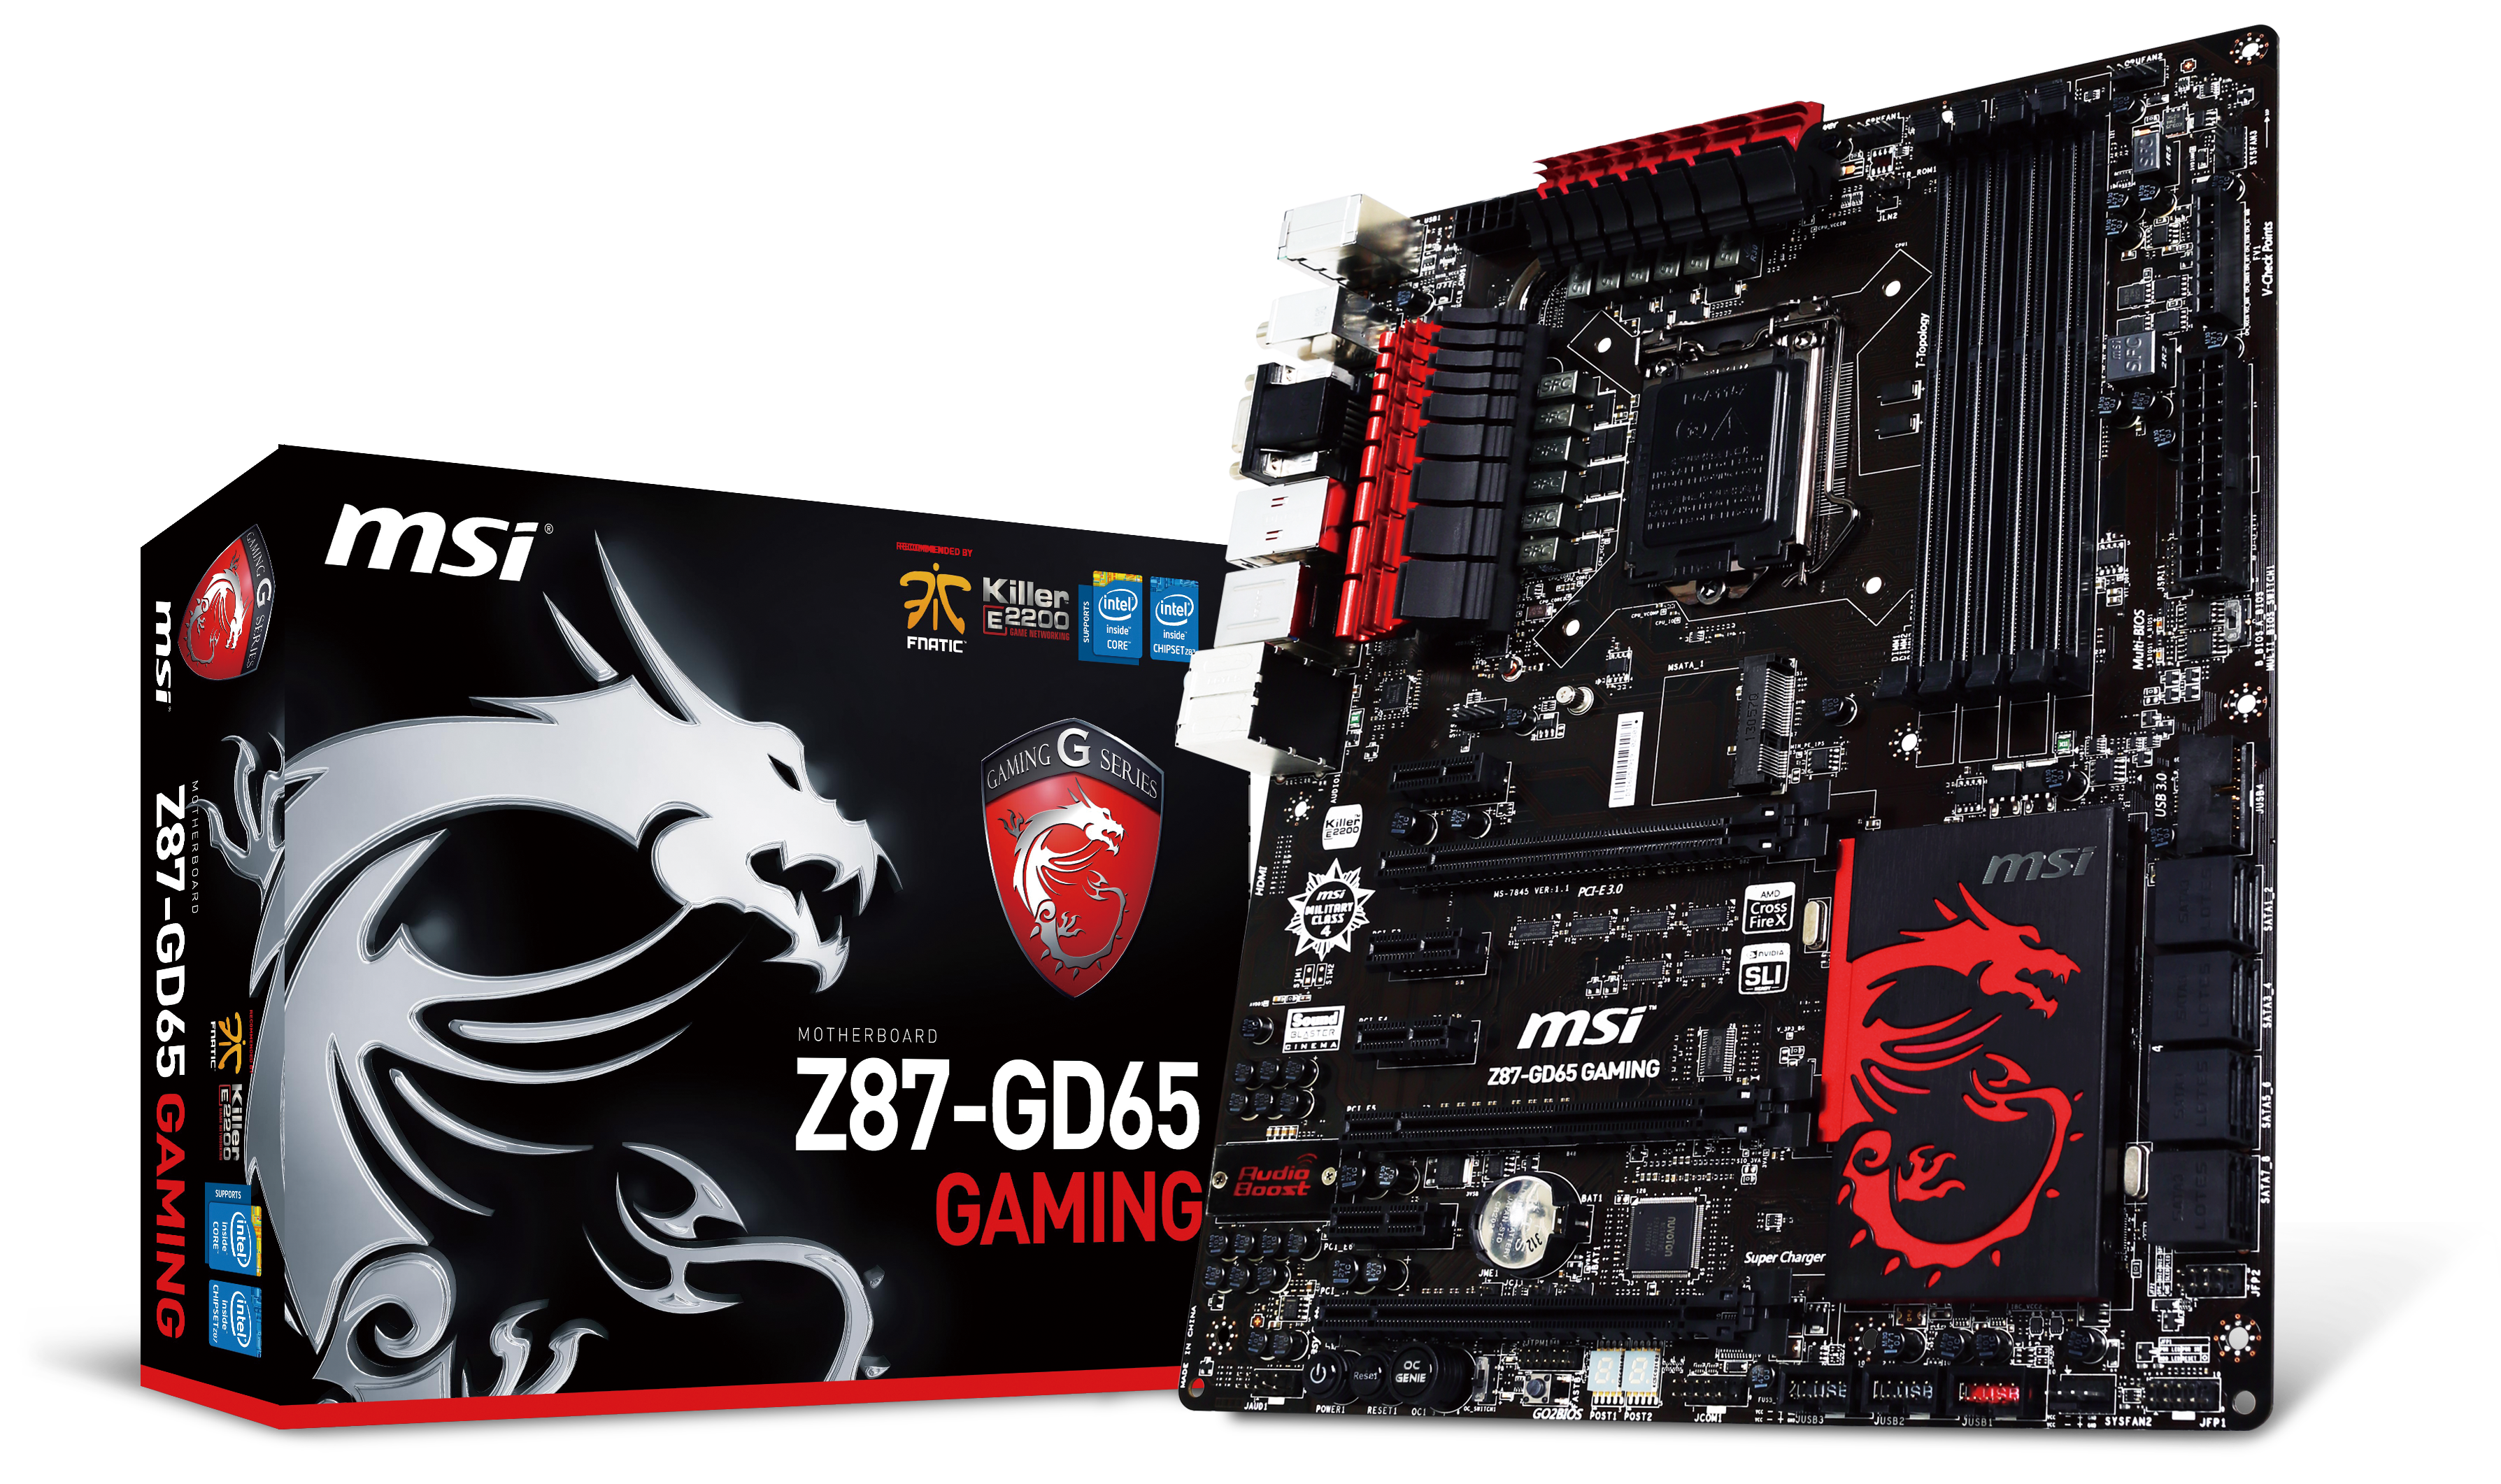 MSI Z87-GD65 Gaming Overview, Visual Inspection, Board Features